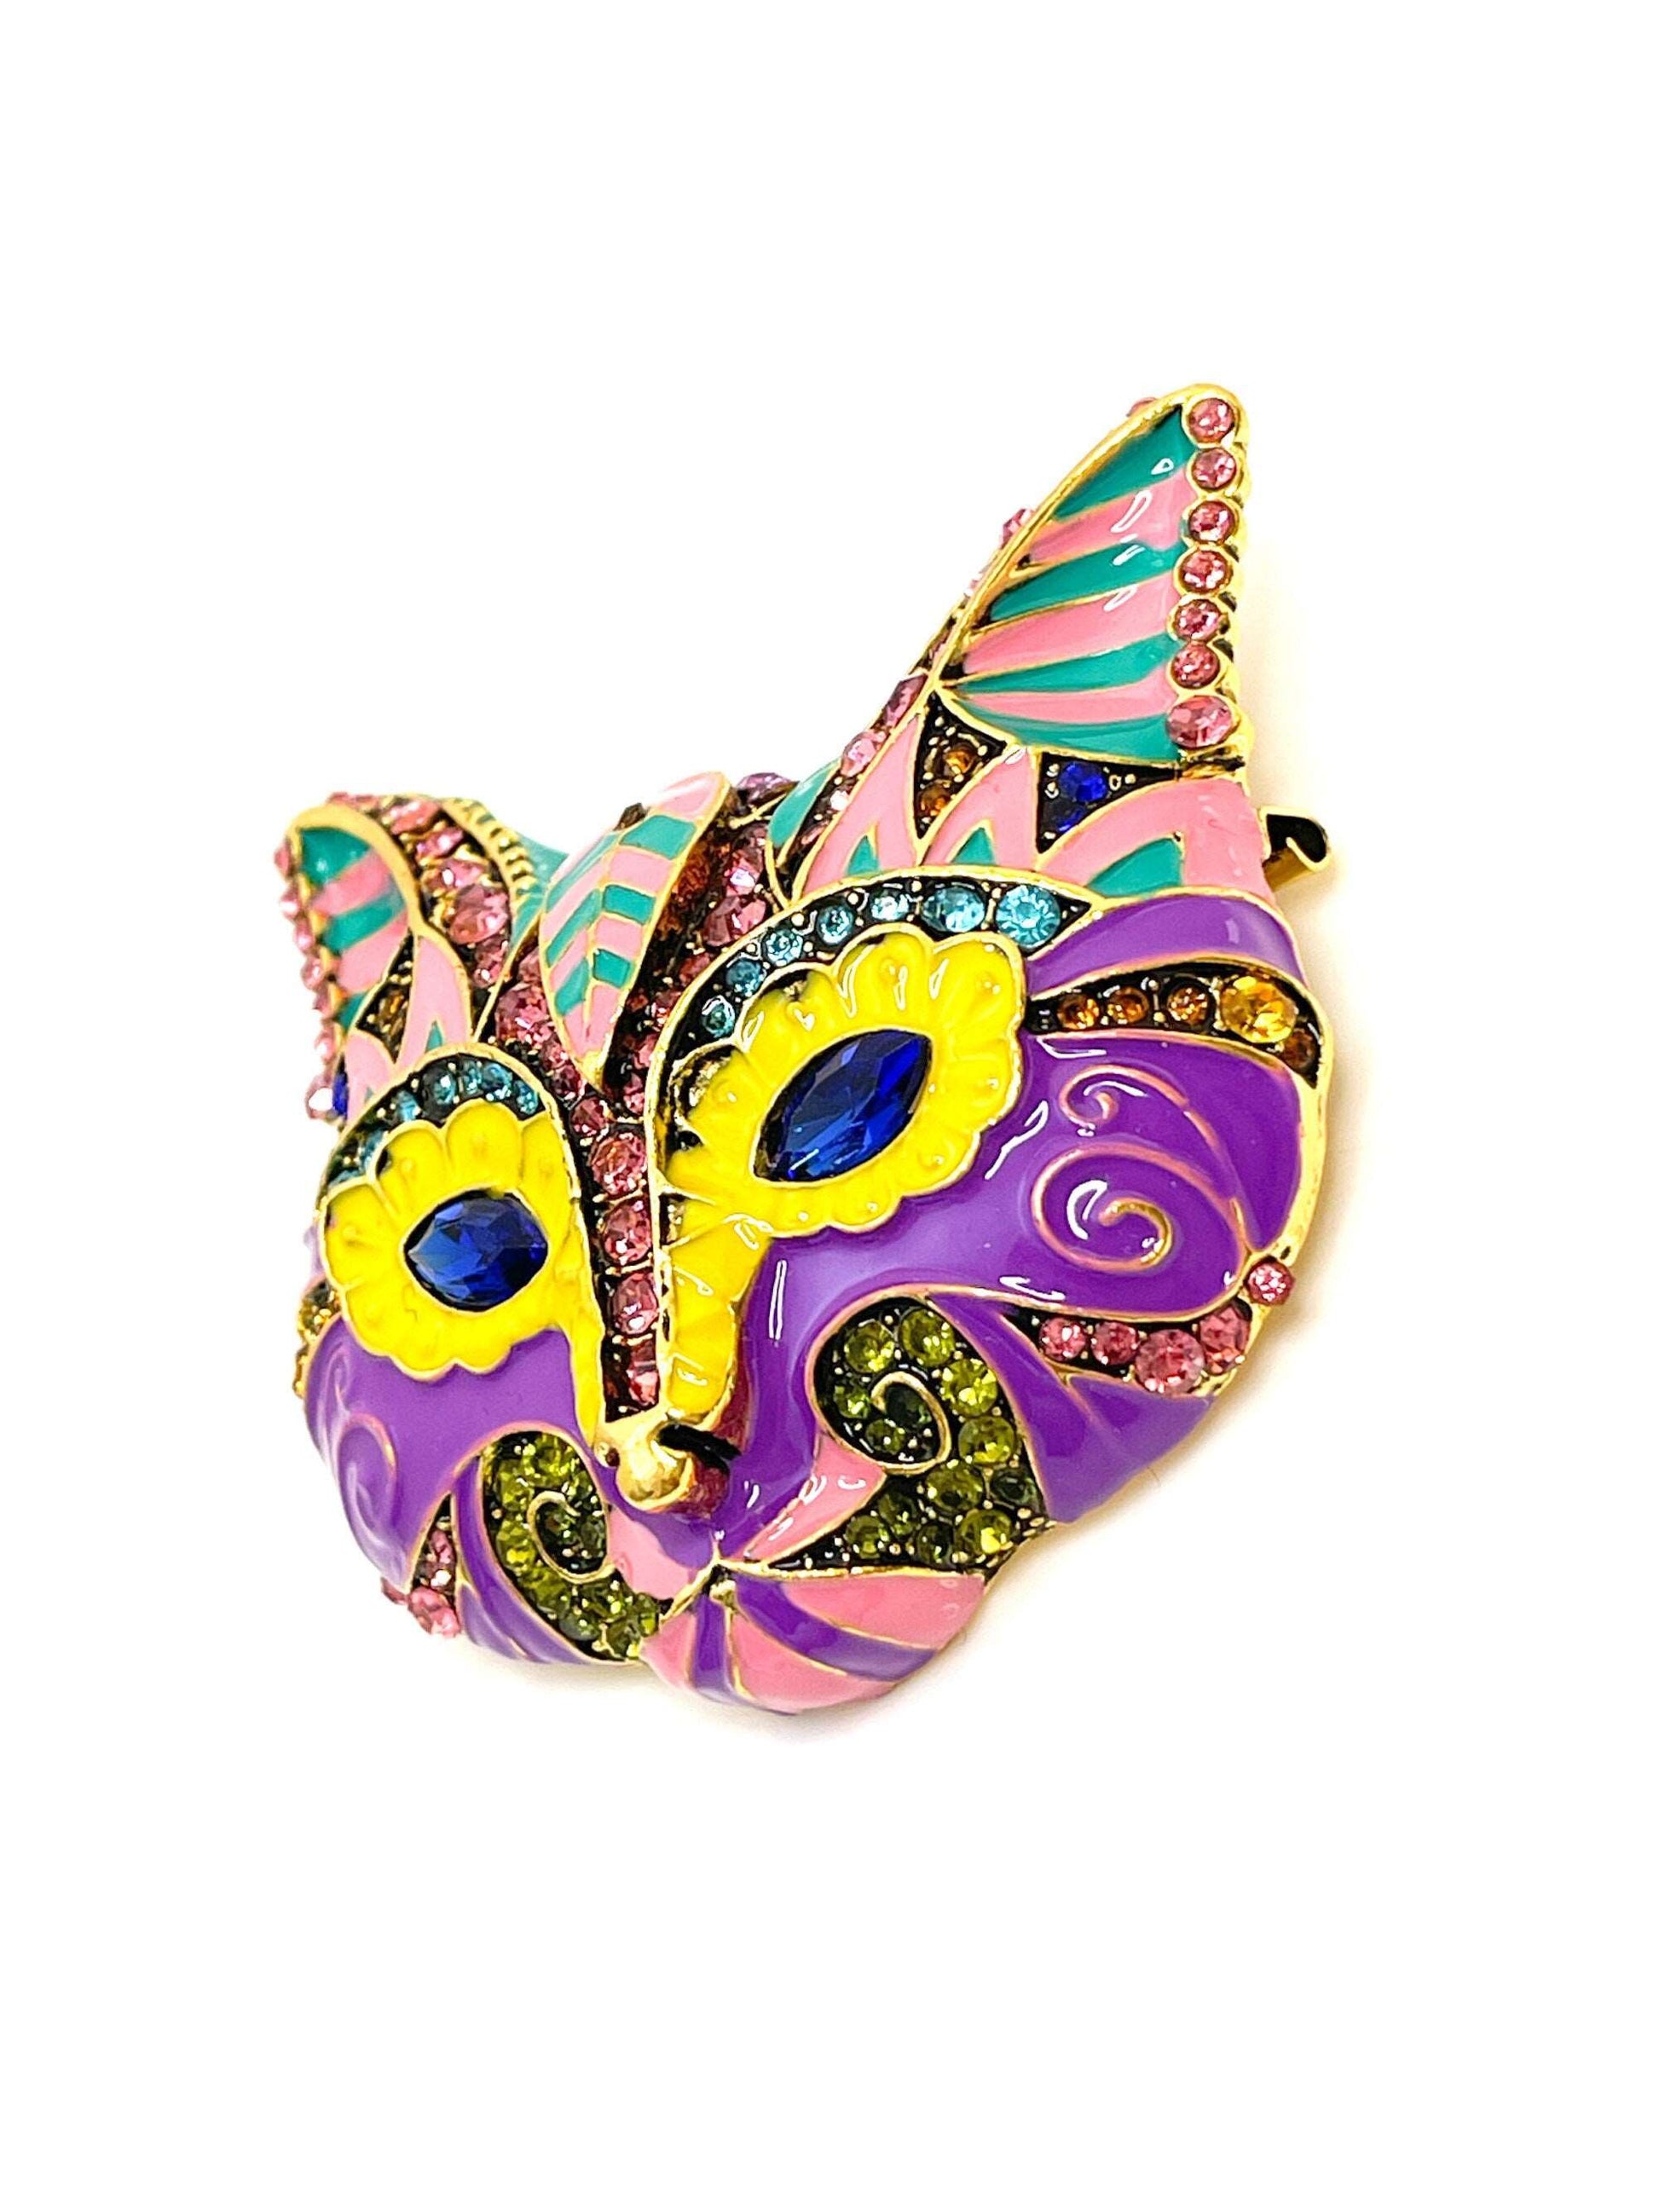 Large Multicolour Cat Brooch, Enamel Cat Head Pin, Crystal Animal Pin, Bright Sparkly Cat Mask, Brooches For Women